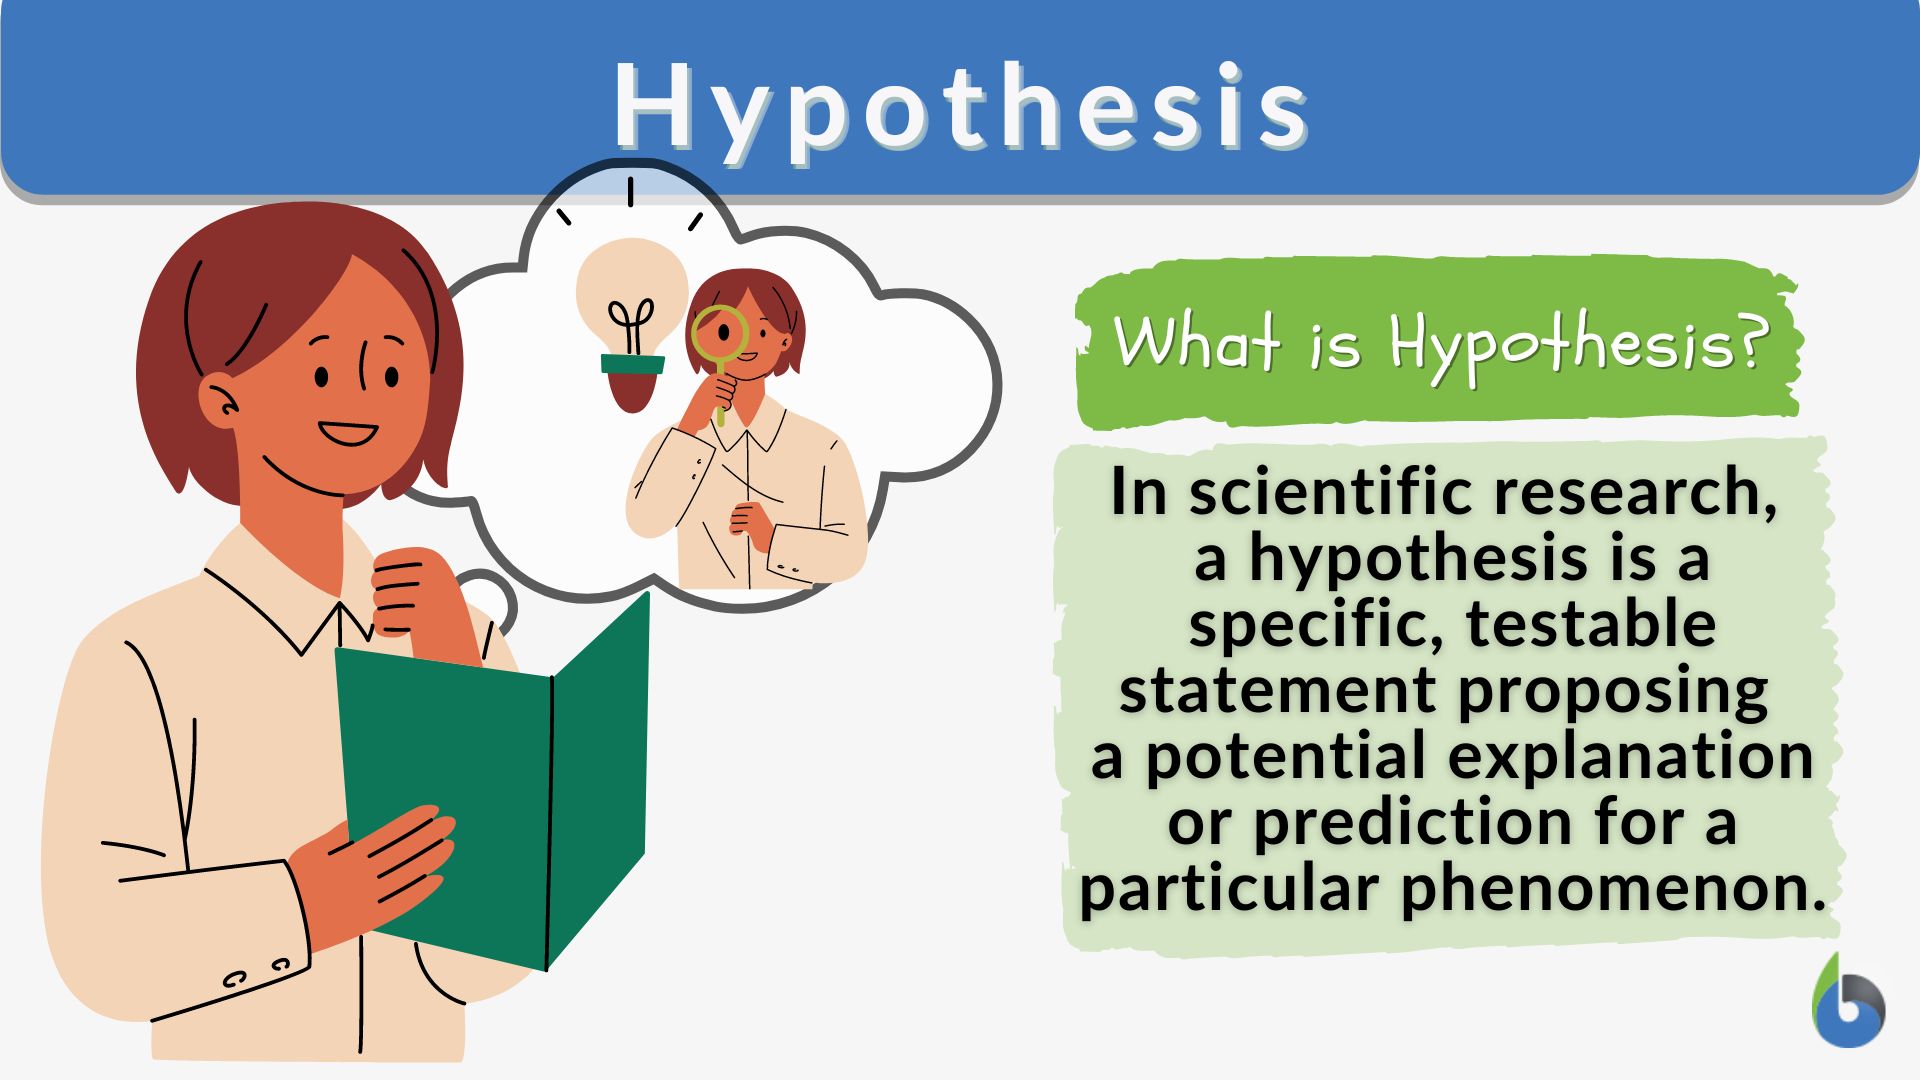 what is a hypothesis based on